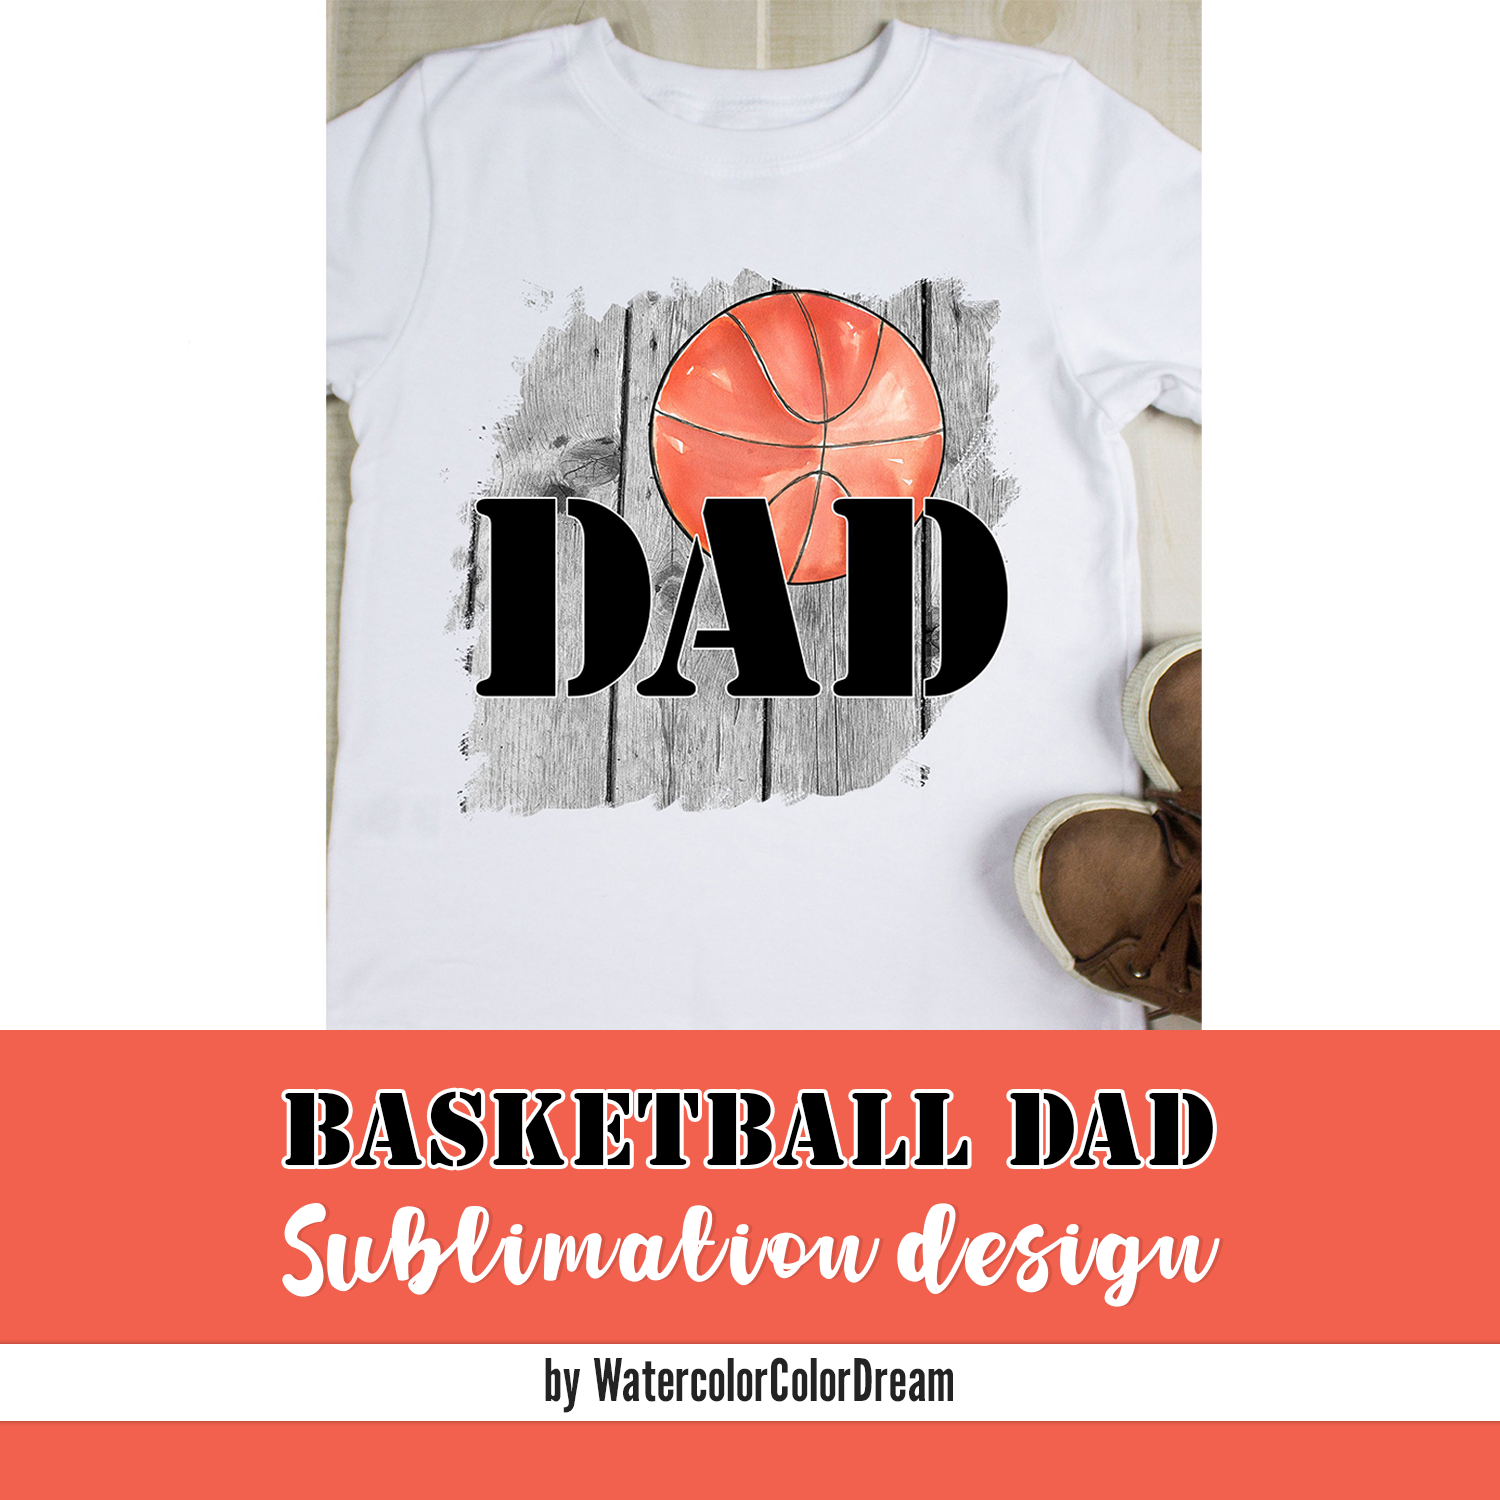 Preview basketball dad sublimation design.